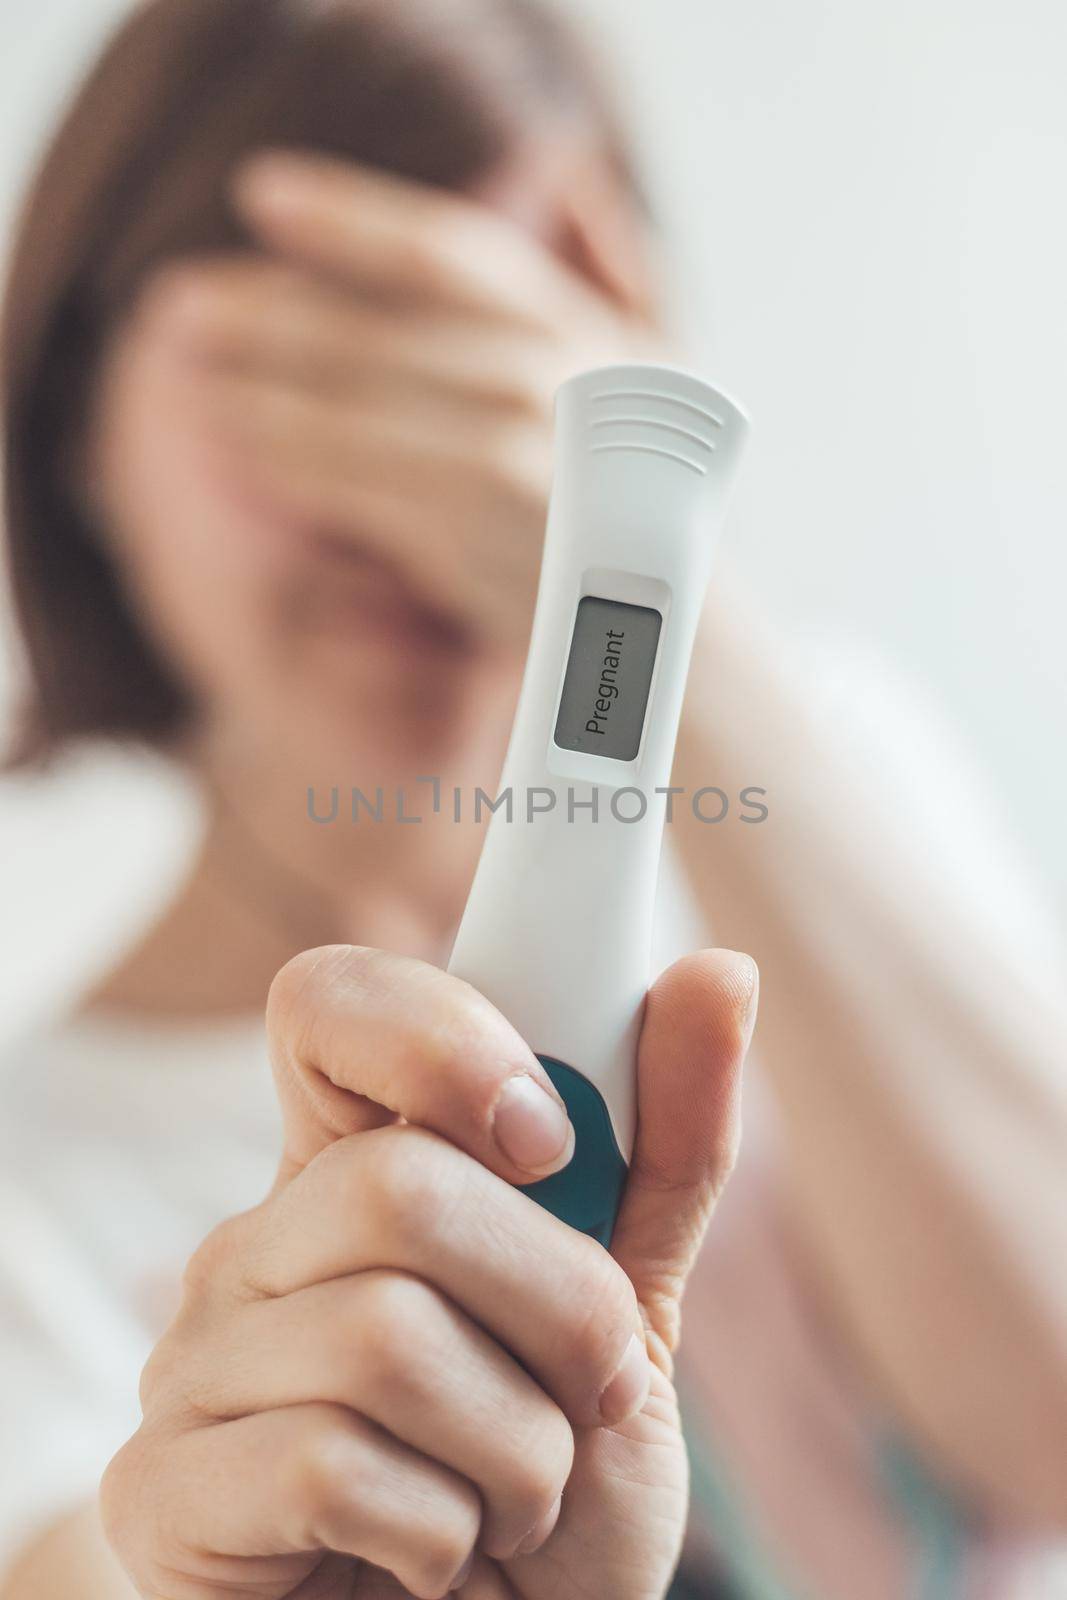 Nervous woman sitting on the bed, checking pregnancy test. Result positive, “Pregnant” by Daxenbichler